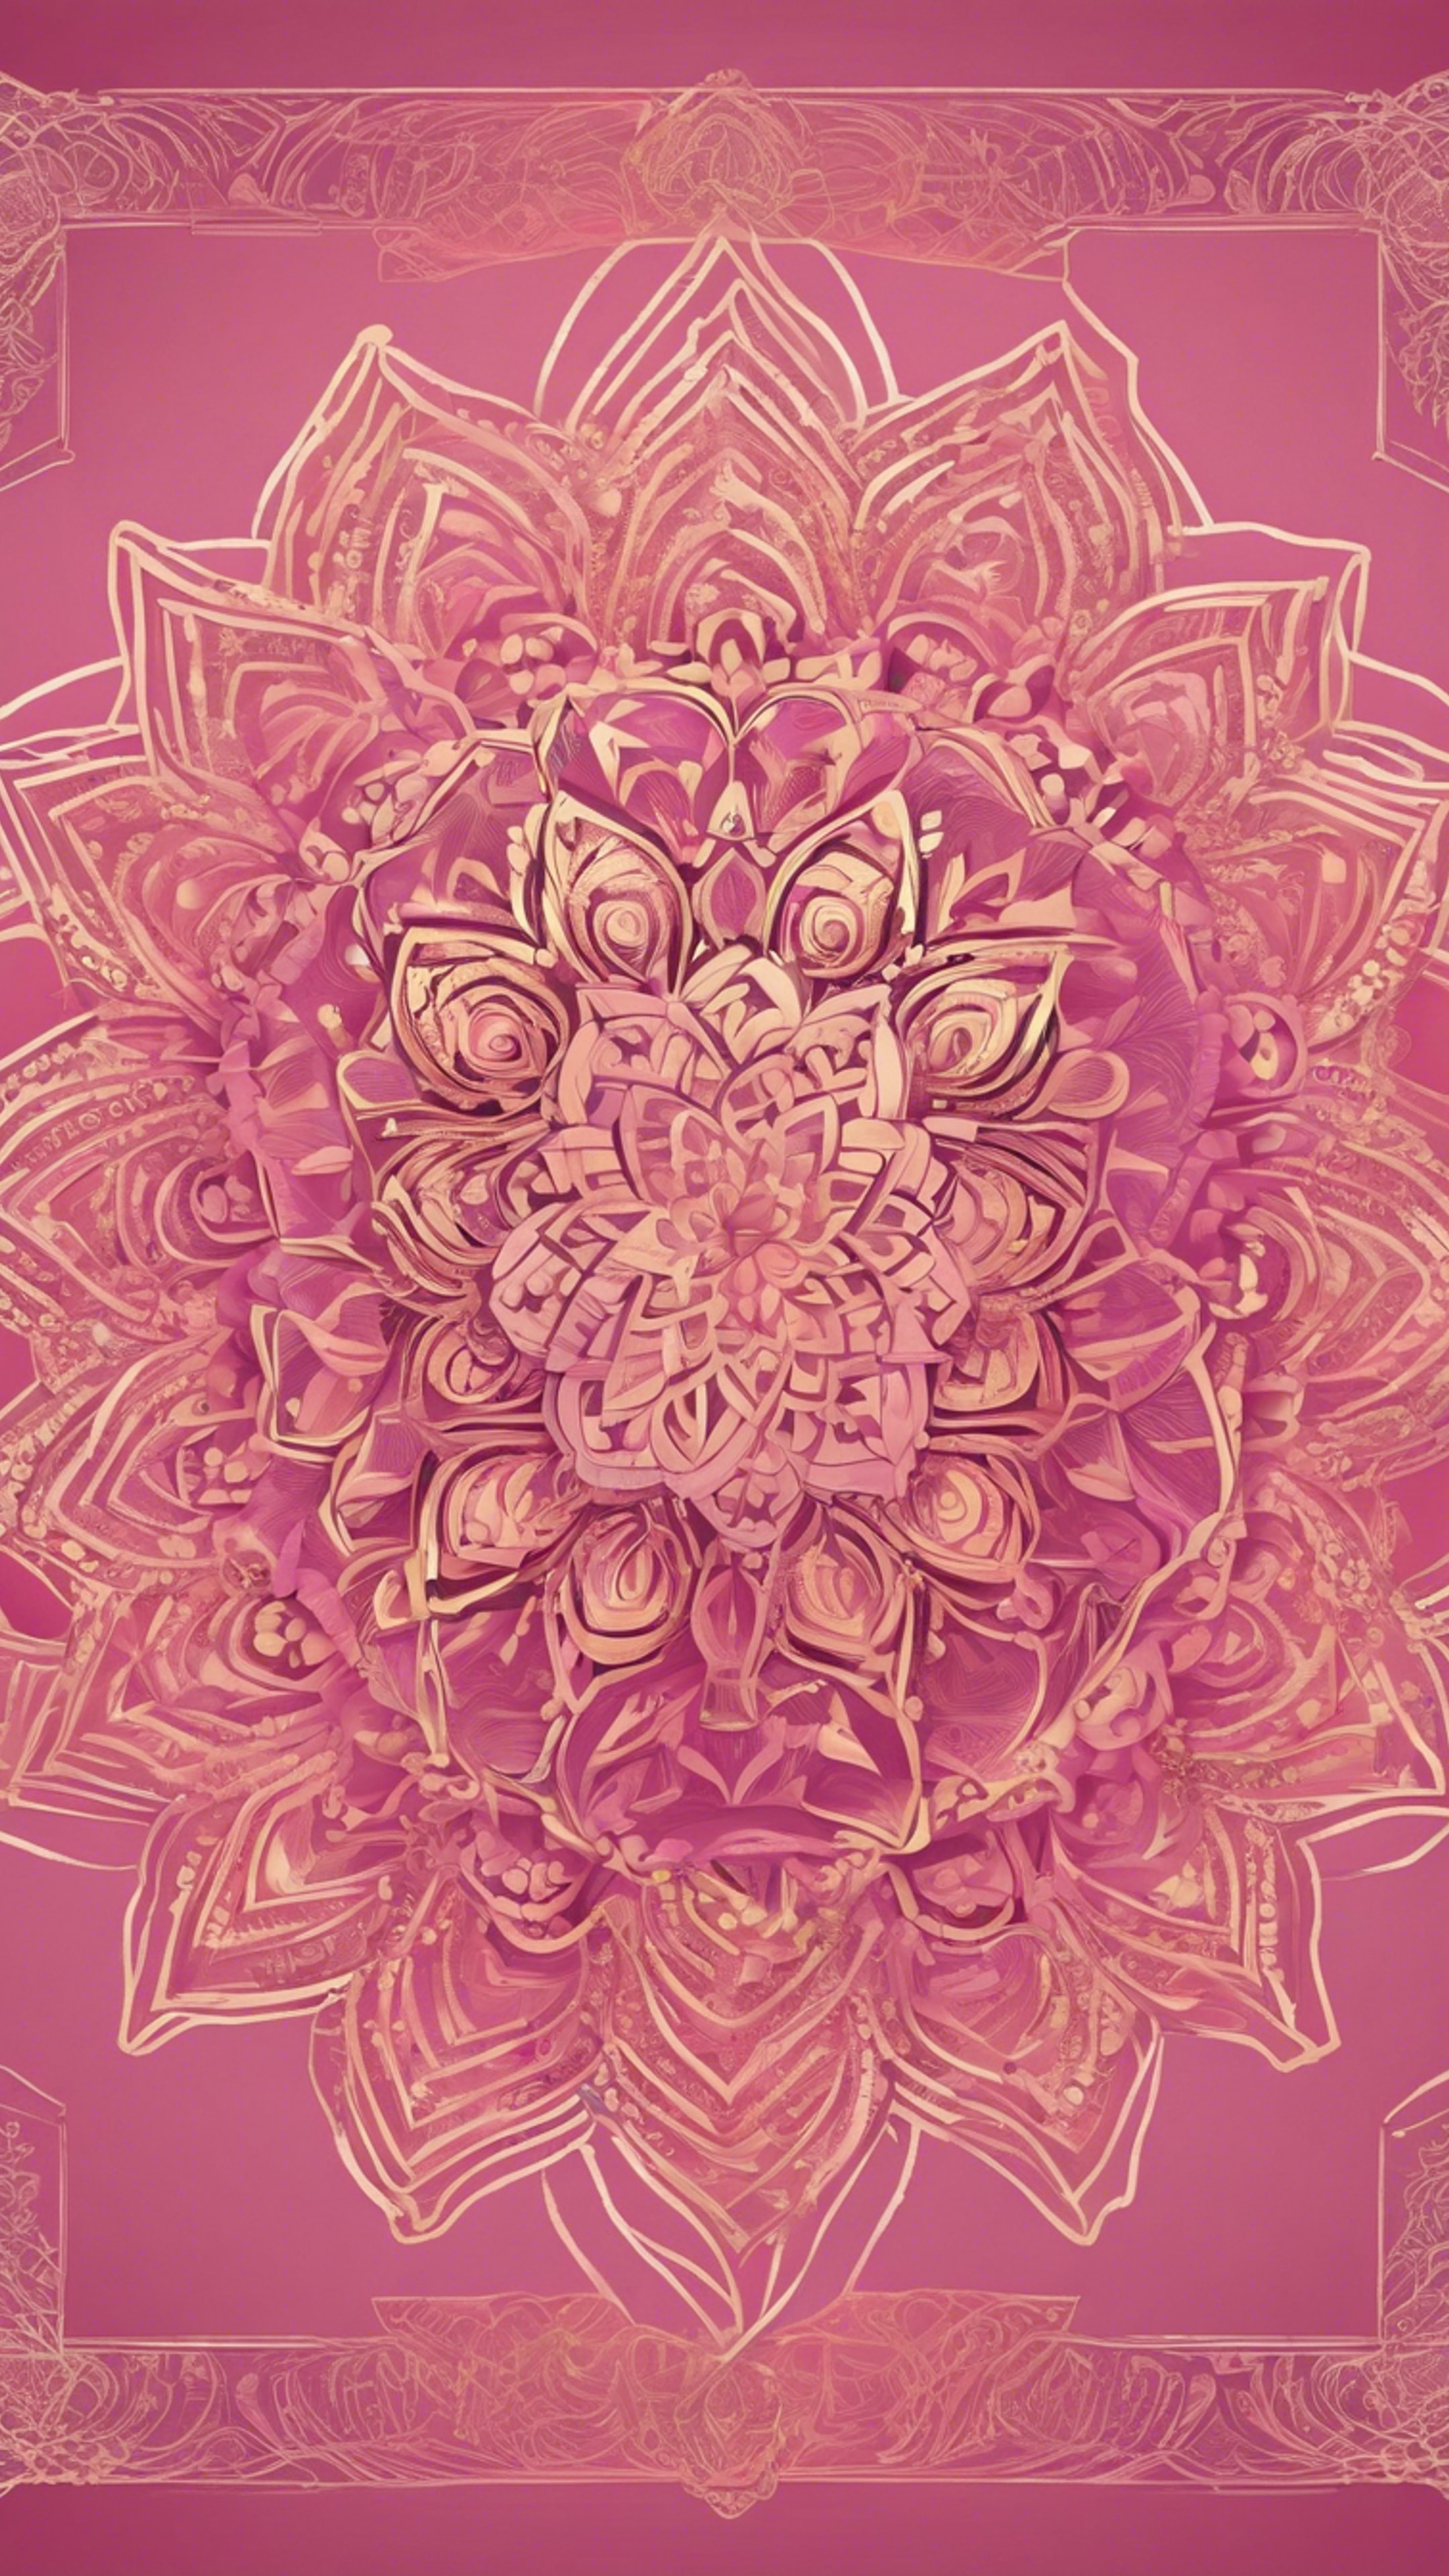 A pink and gold mandala design flourishing with intricate line art and vibrant colors. Tapet[7f3fcd6ed997428c89d3]